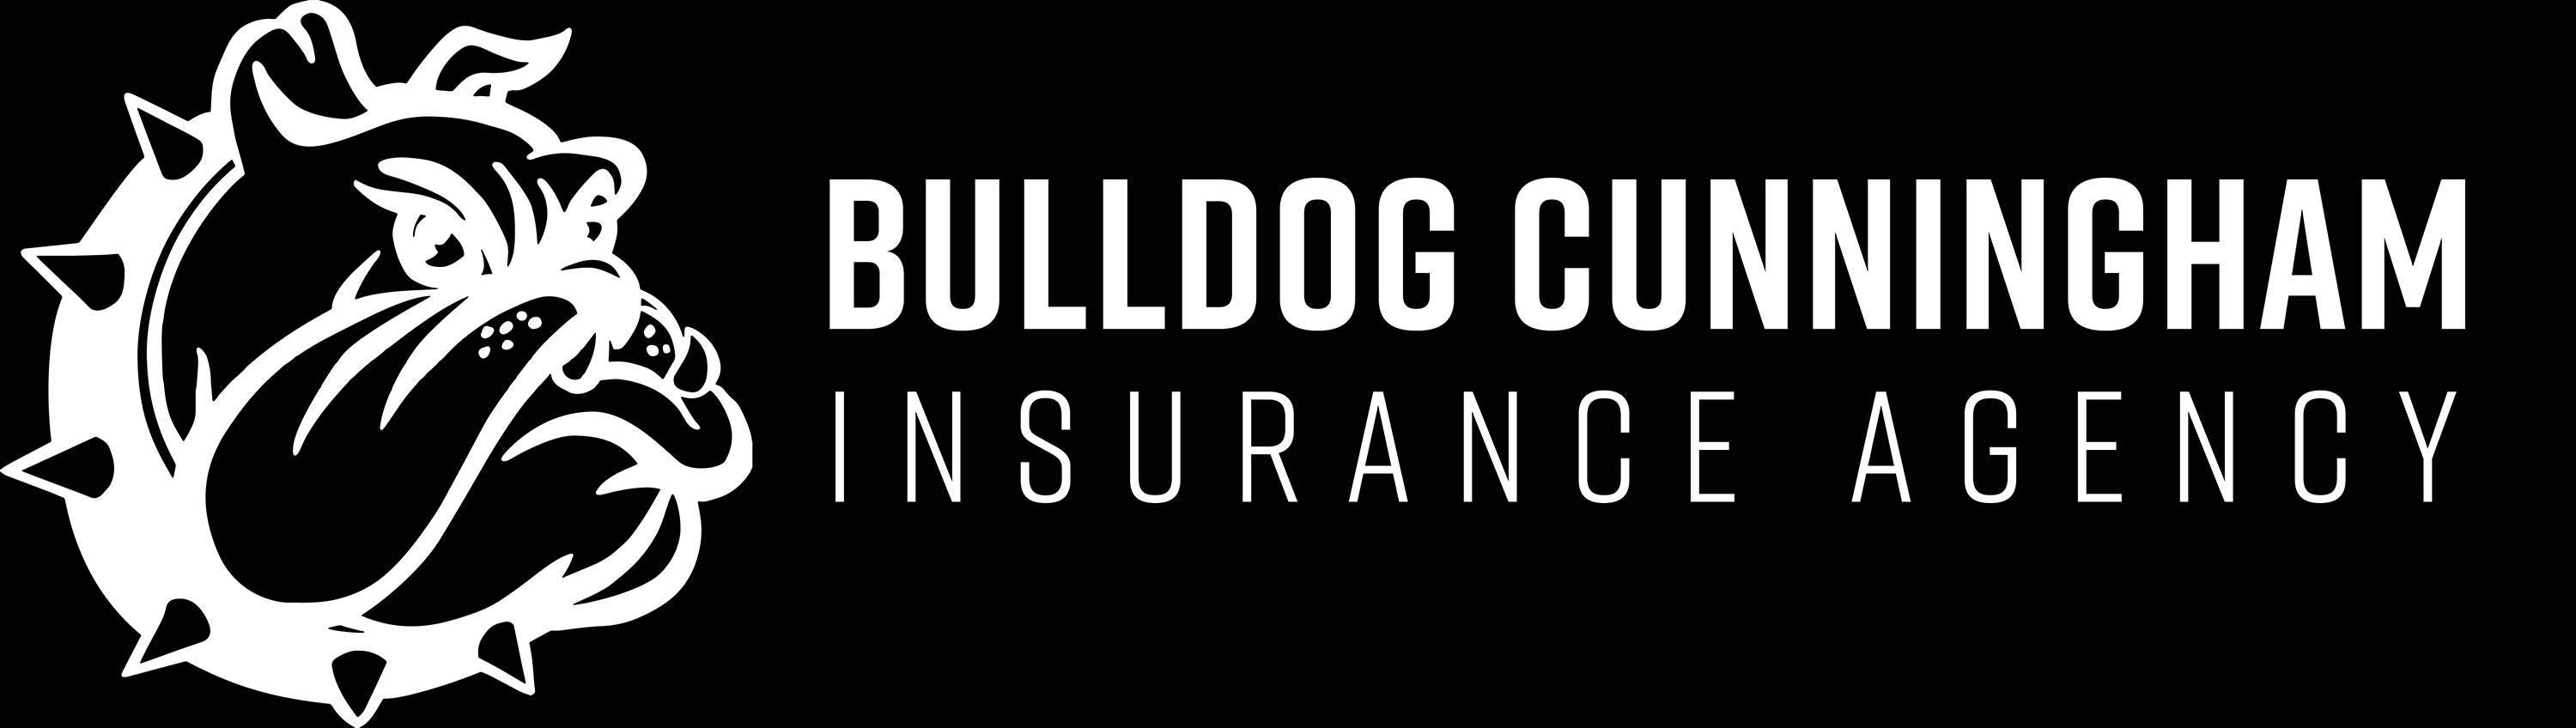 judge vic cunningham insurance agency in dallas tx - formerly bulldog cunningham insurance agency